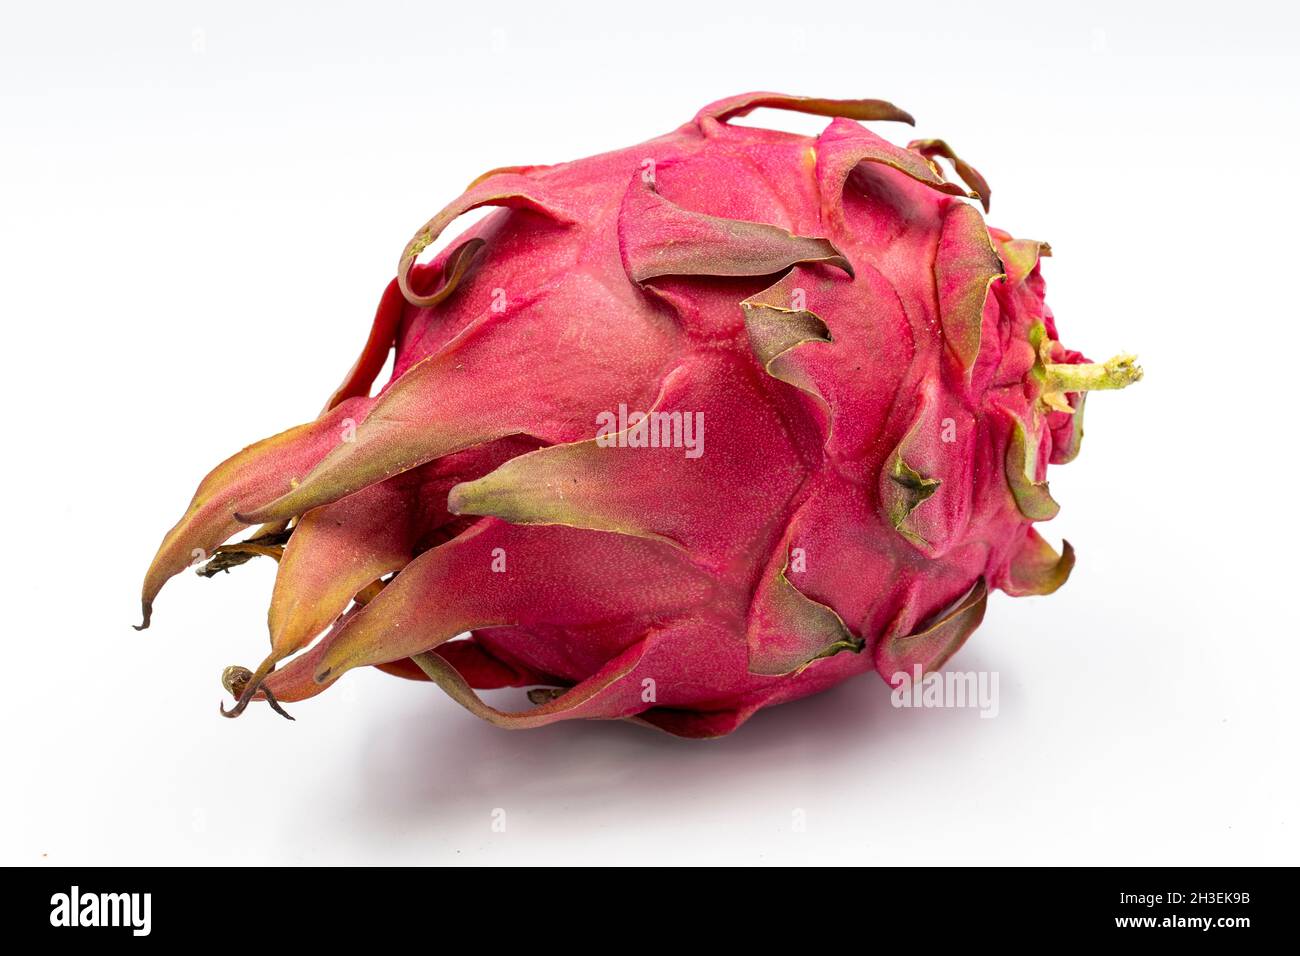 Dragon fruit, pitaya on white background with shadow. A pitaya or pitahaya is the fruit of several cactus species indigenous to the Americas. Close up Stock Photo